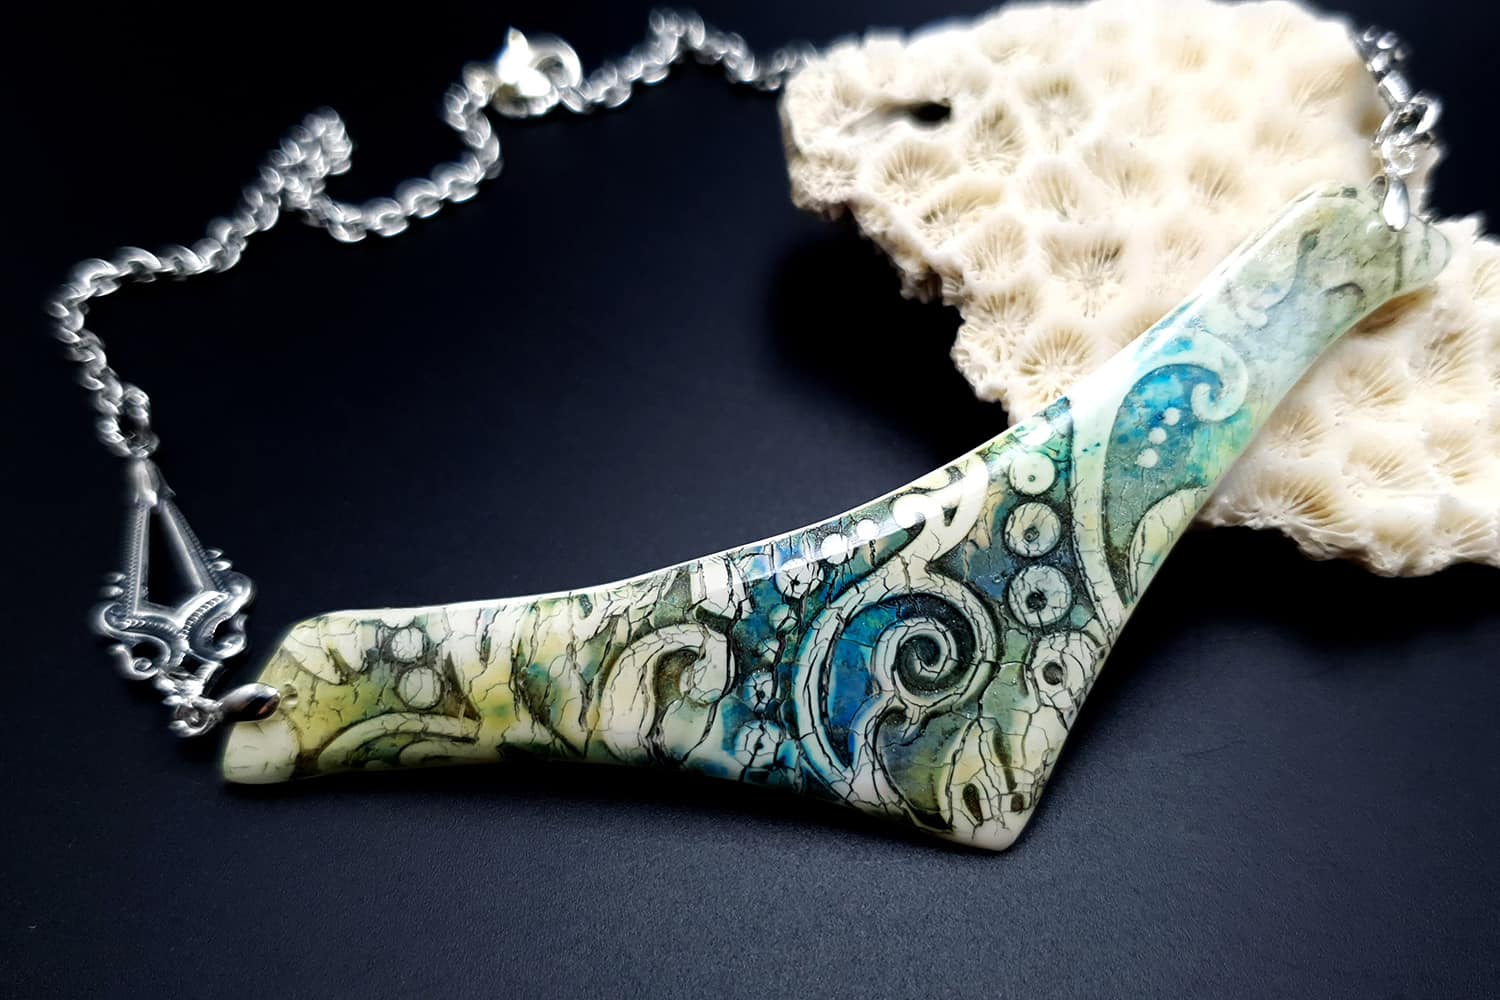 Jewelry from "Faux Glazed Cracked Ceramic" course for your inspiration #10